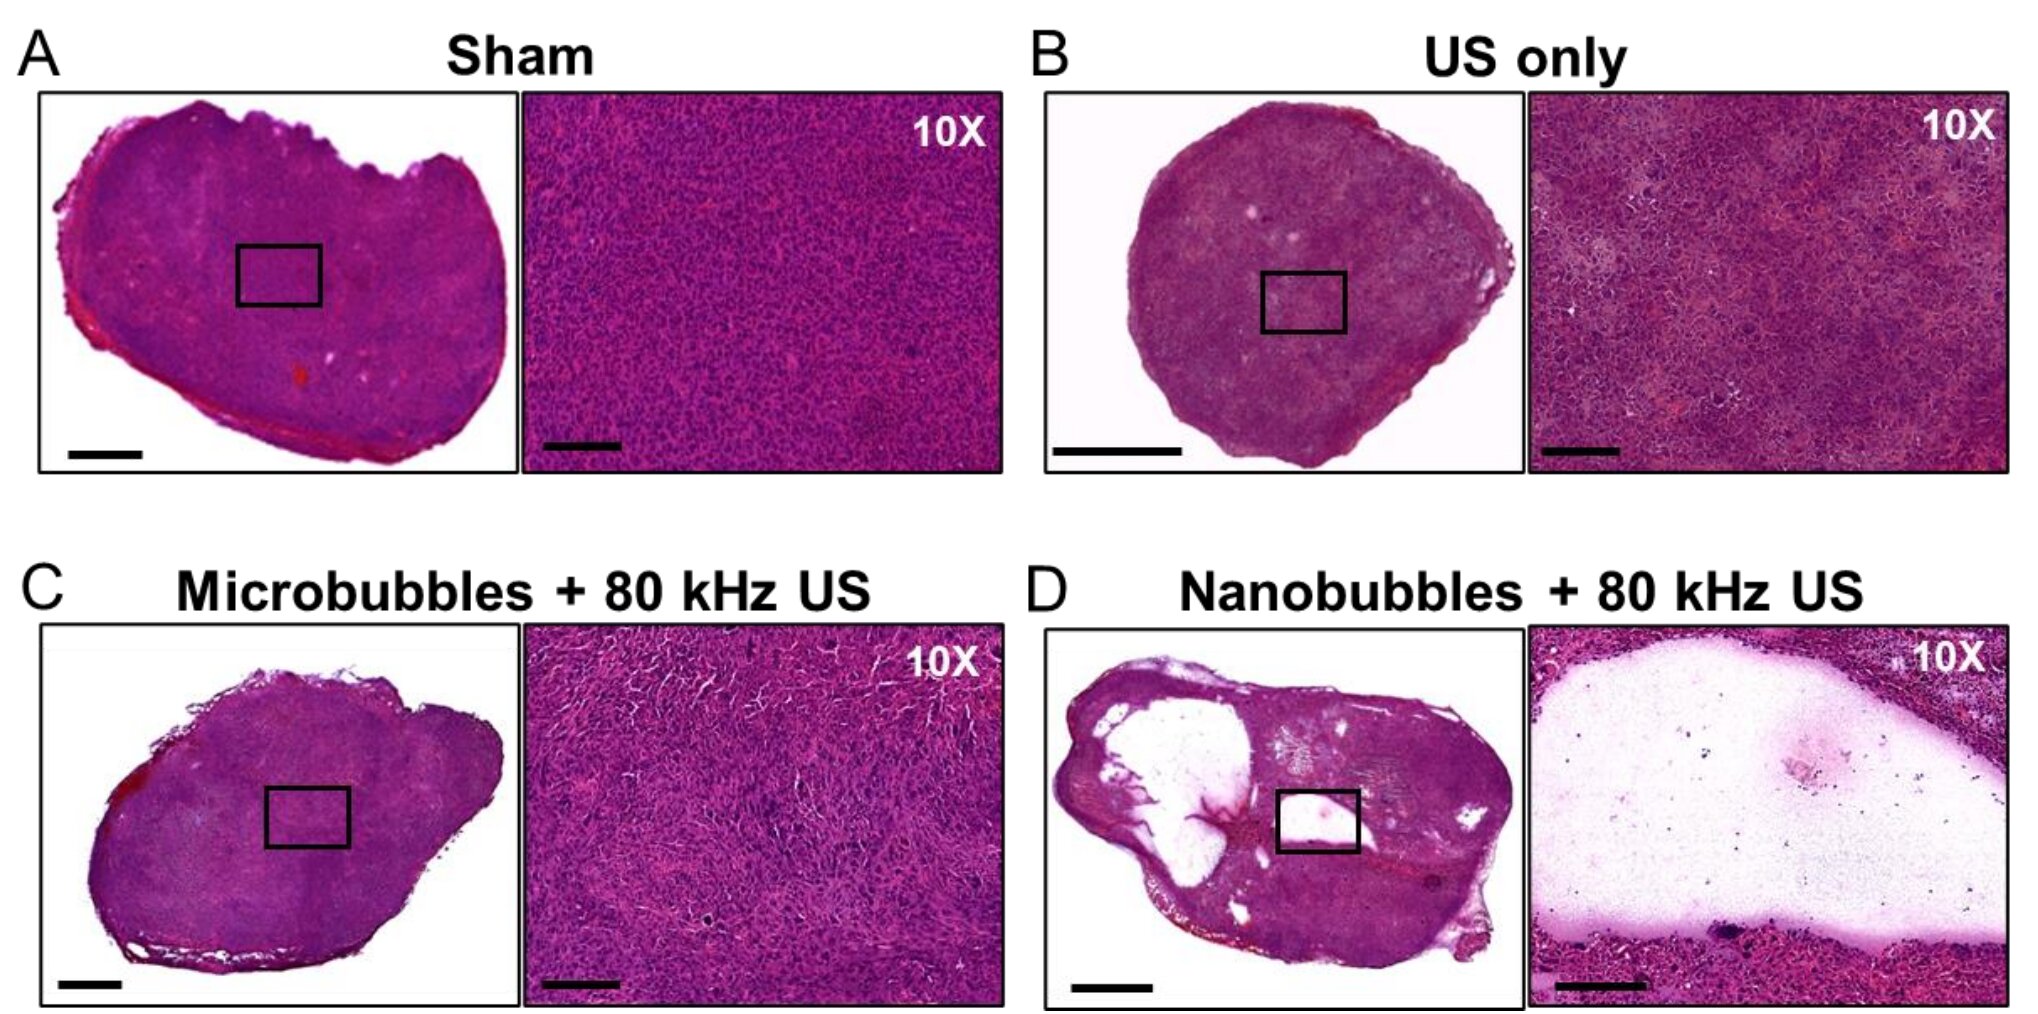 A combination of ultrasound and nanobubbles allows cancerous tumors to be destro..